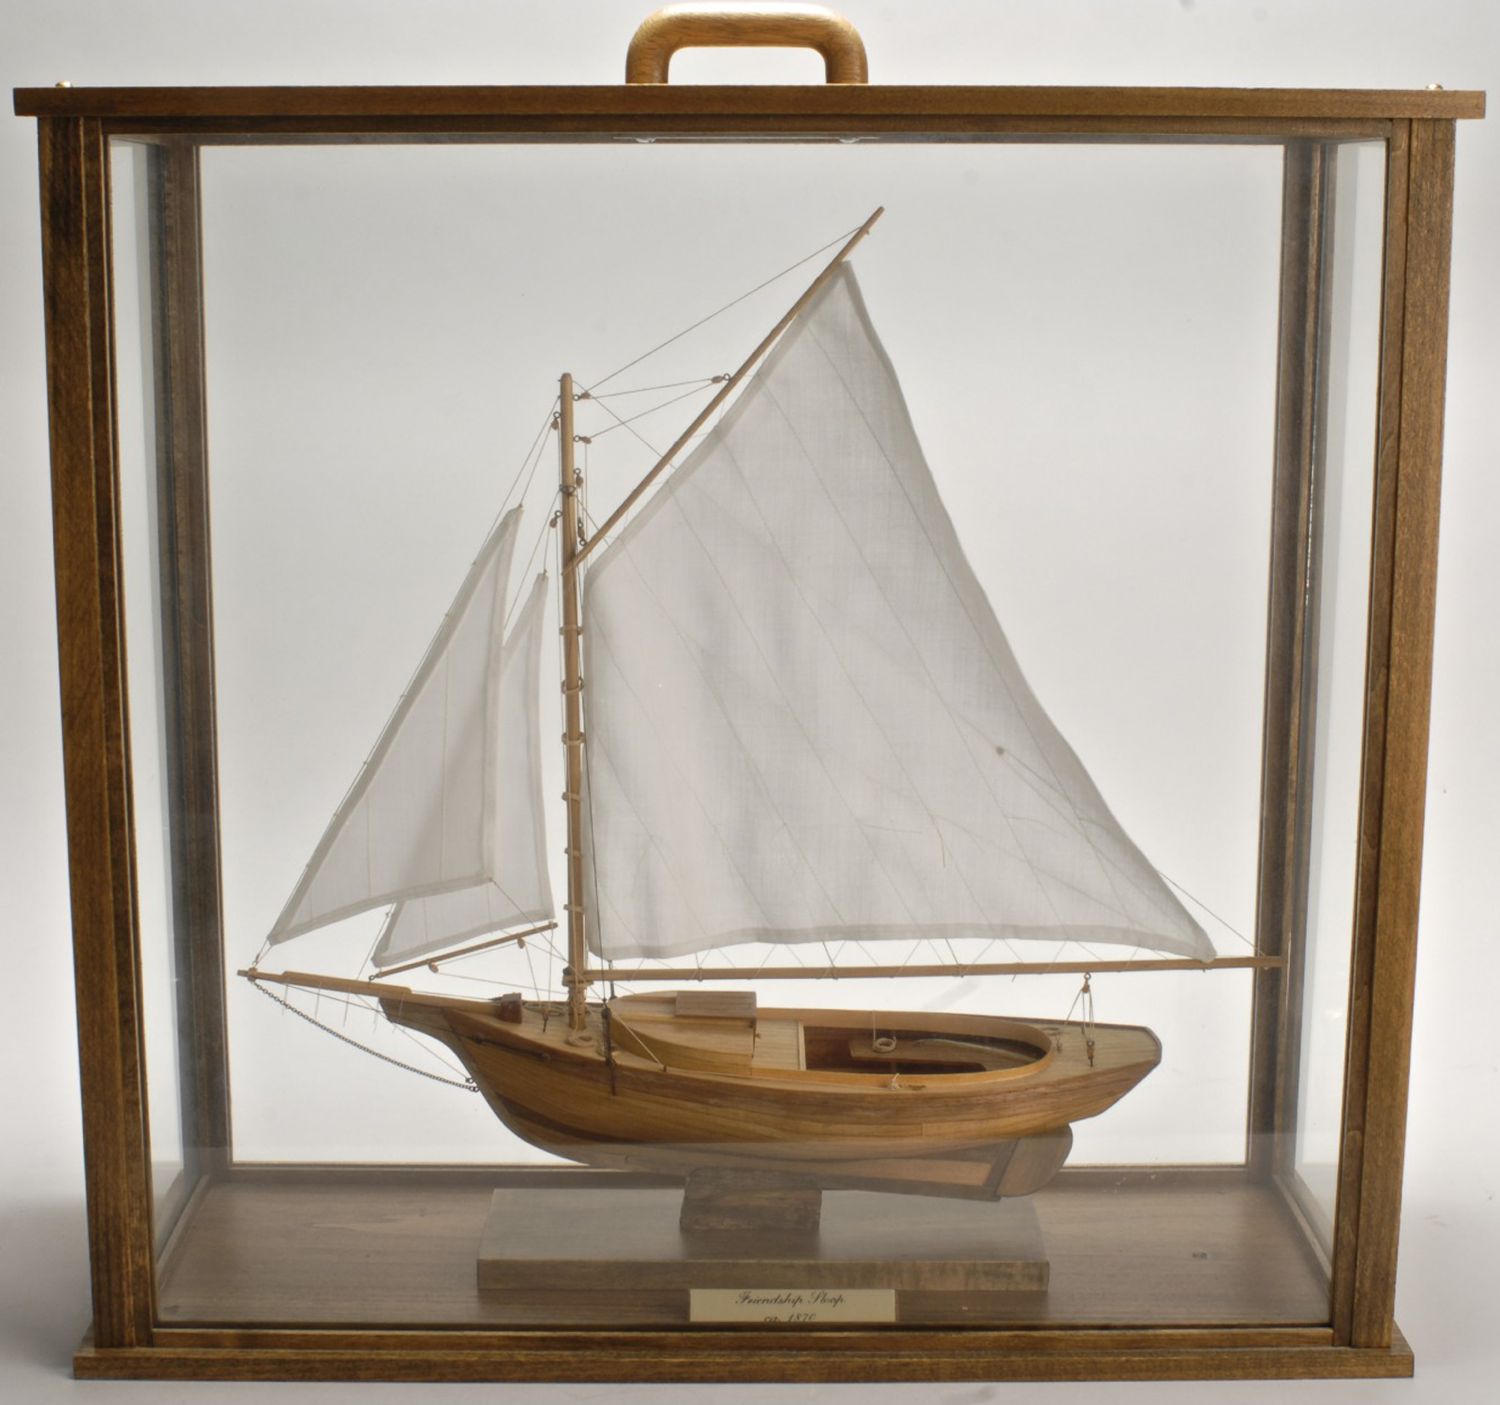 CASED WOODEN MODEL OF A FRIENDSHIP-STYLE